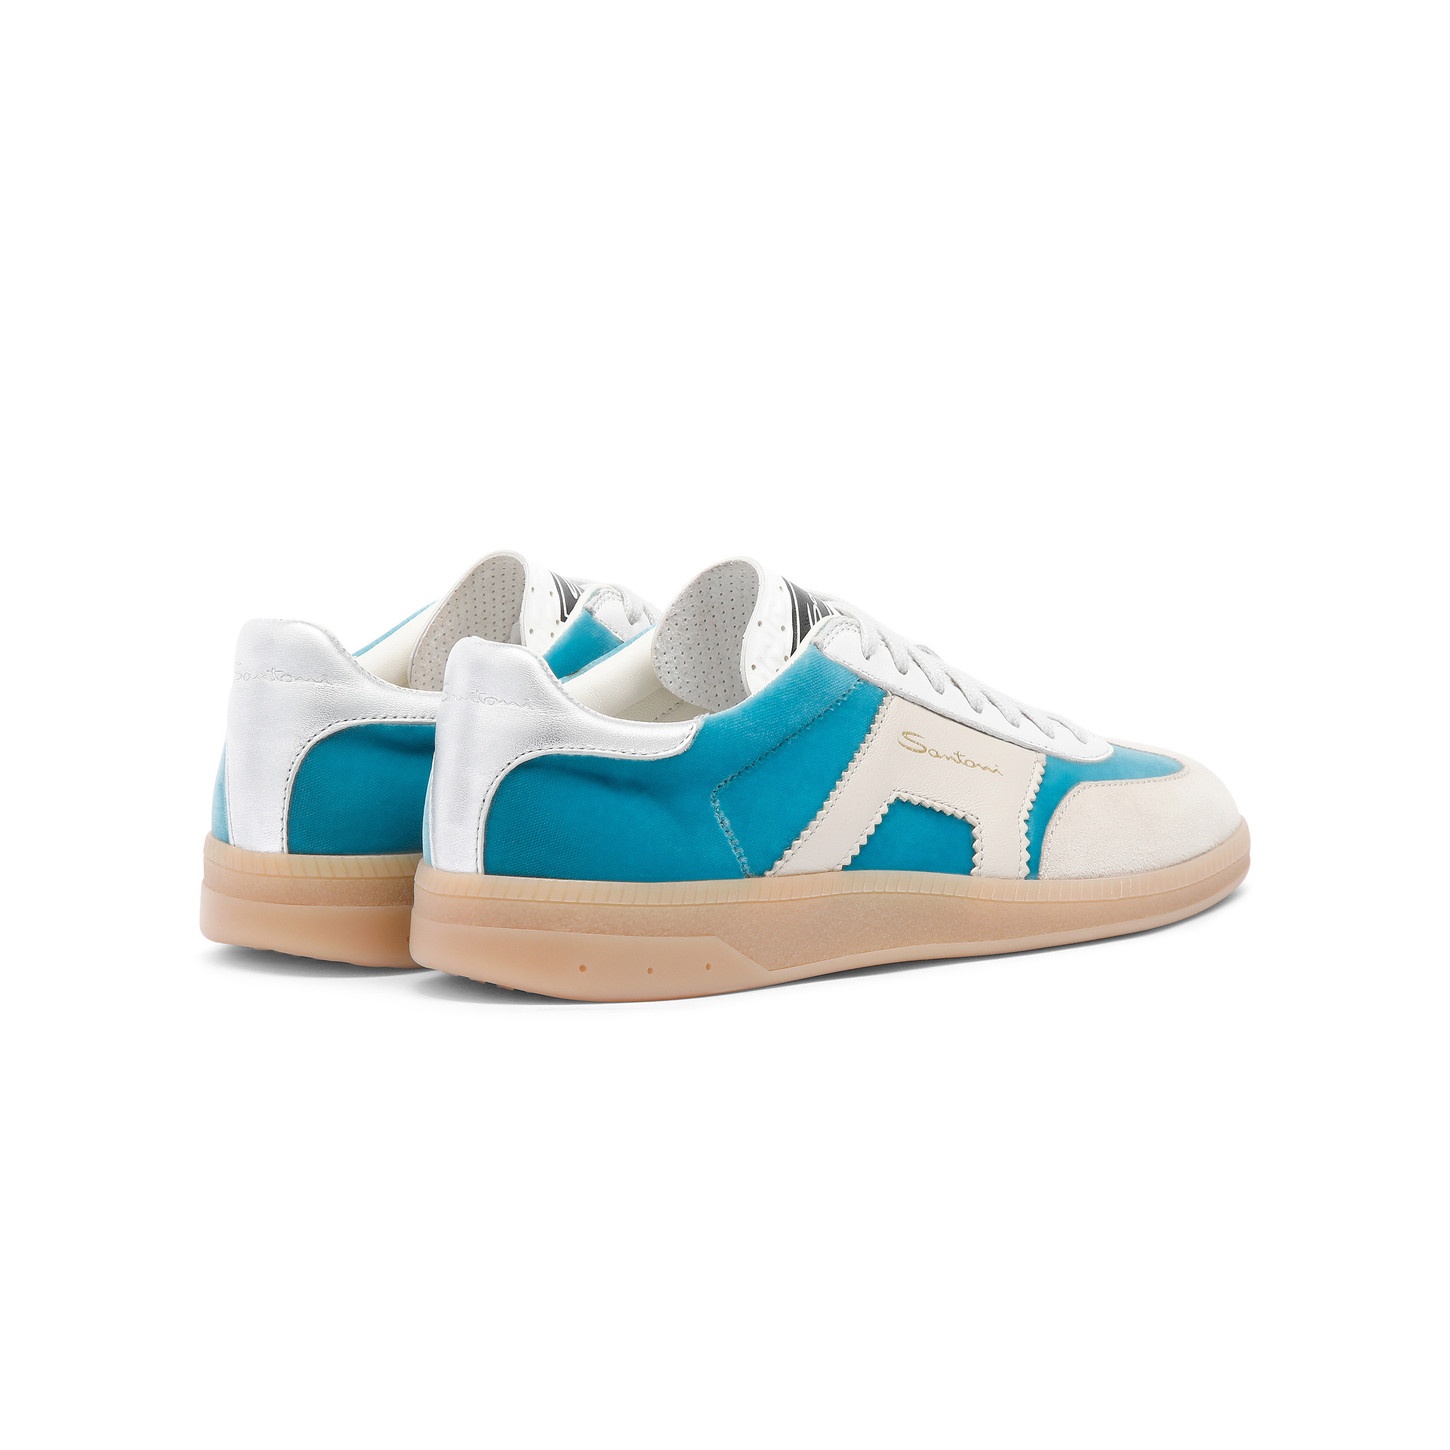 Women's light blue and beige velvet, suede and leather DBS Oly sneaker - 4